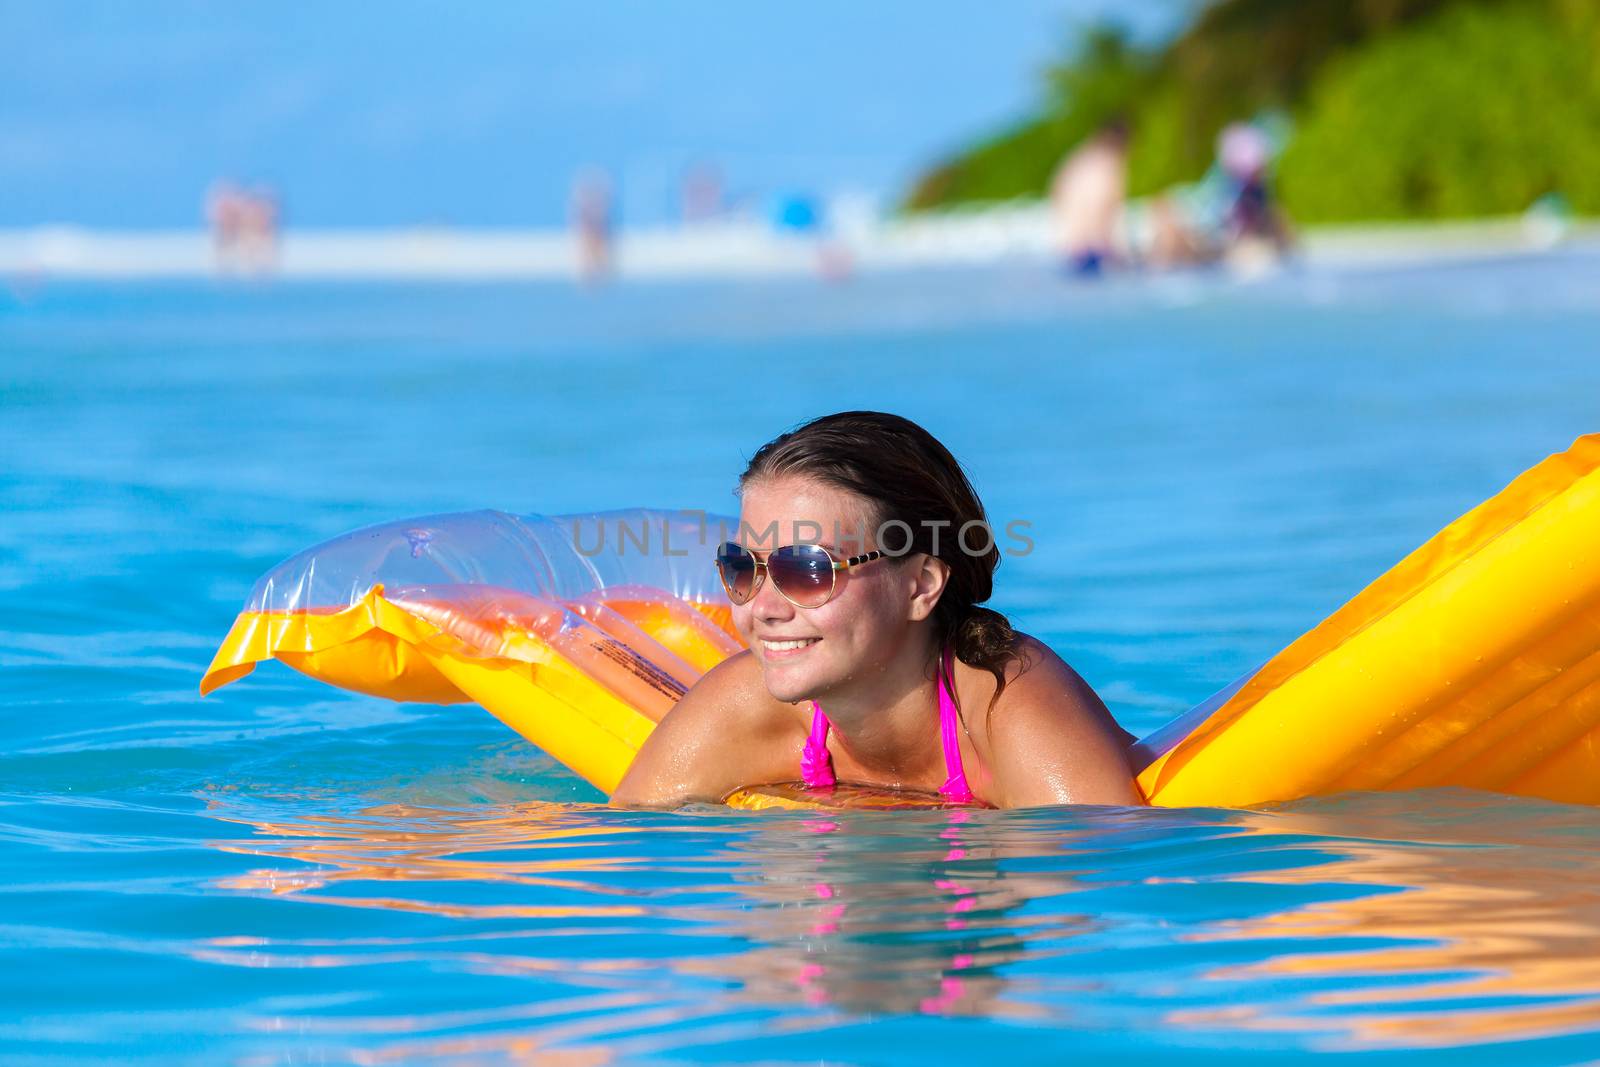 Maldives, a young woman in the water on an air mattress by 25ehaag6